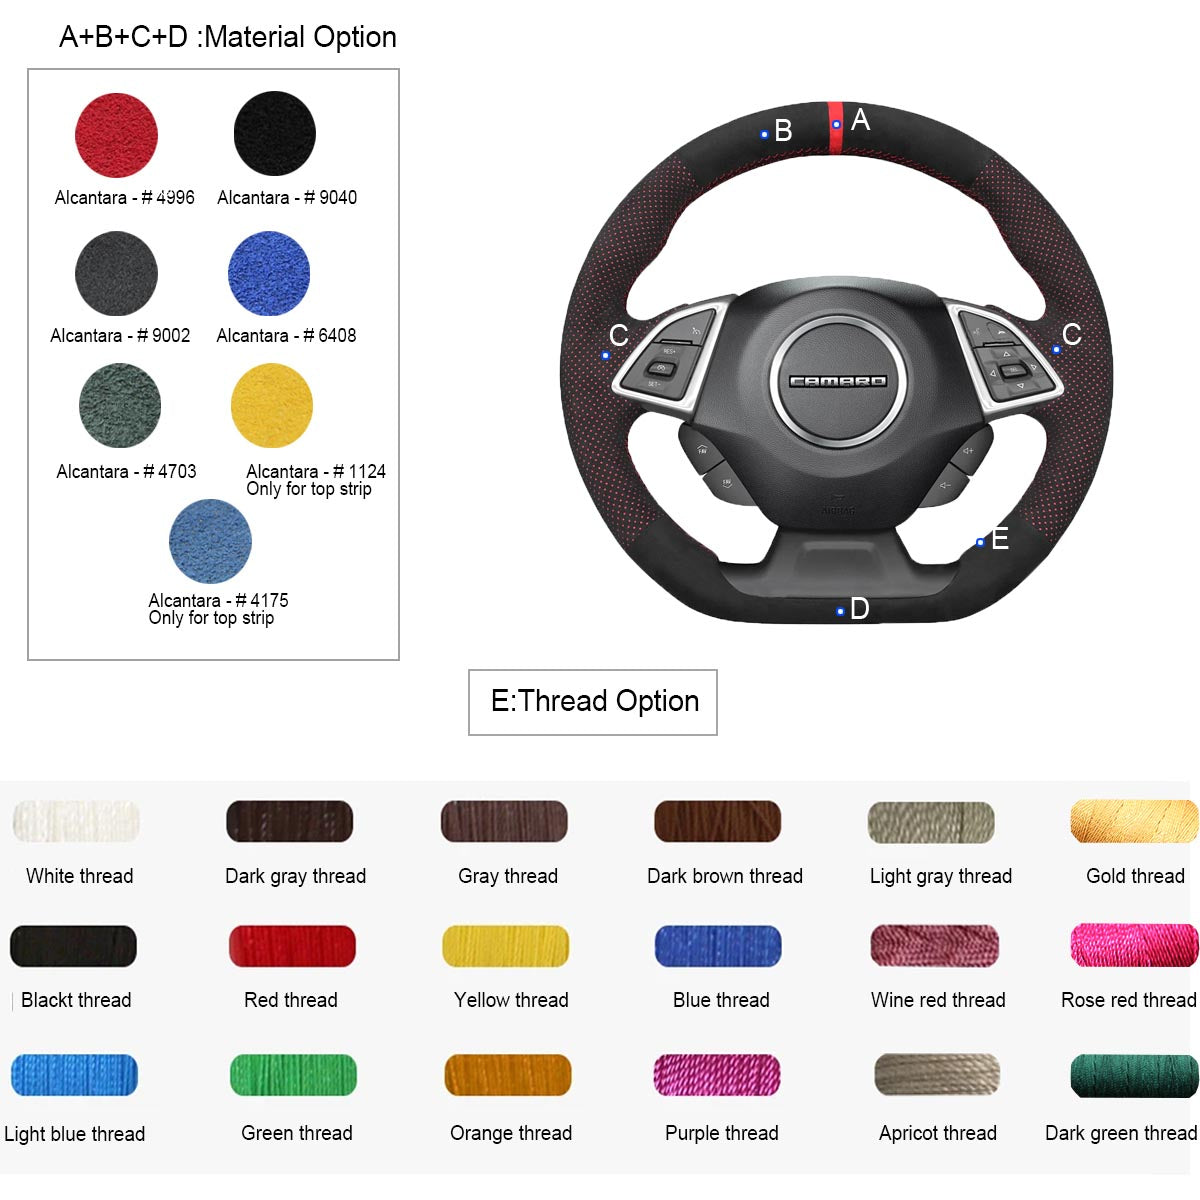 LQTENLEO Alcantara Leather Suede Hand-stitched Car Steering Wheel Cover for Chevrolet Camaro